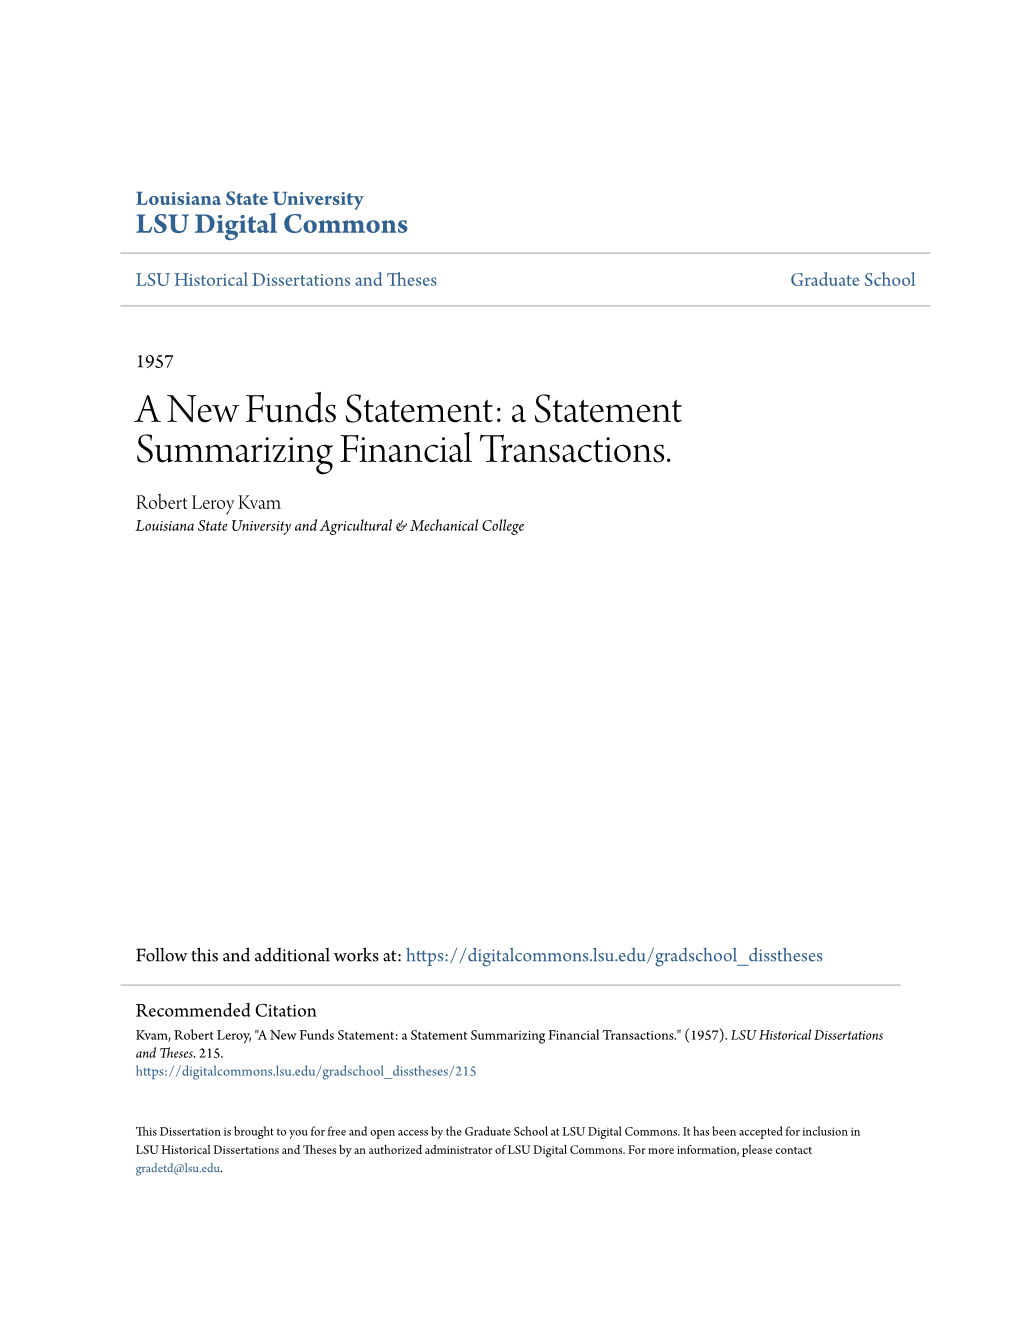 A New Funds Statement: a Statement Summarizing Financial Transactions. Robert Leroy Kvam Louisiana State University and Agricultural & Mechanical College